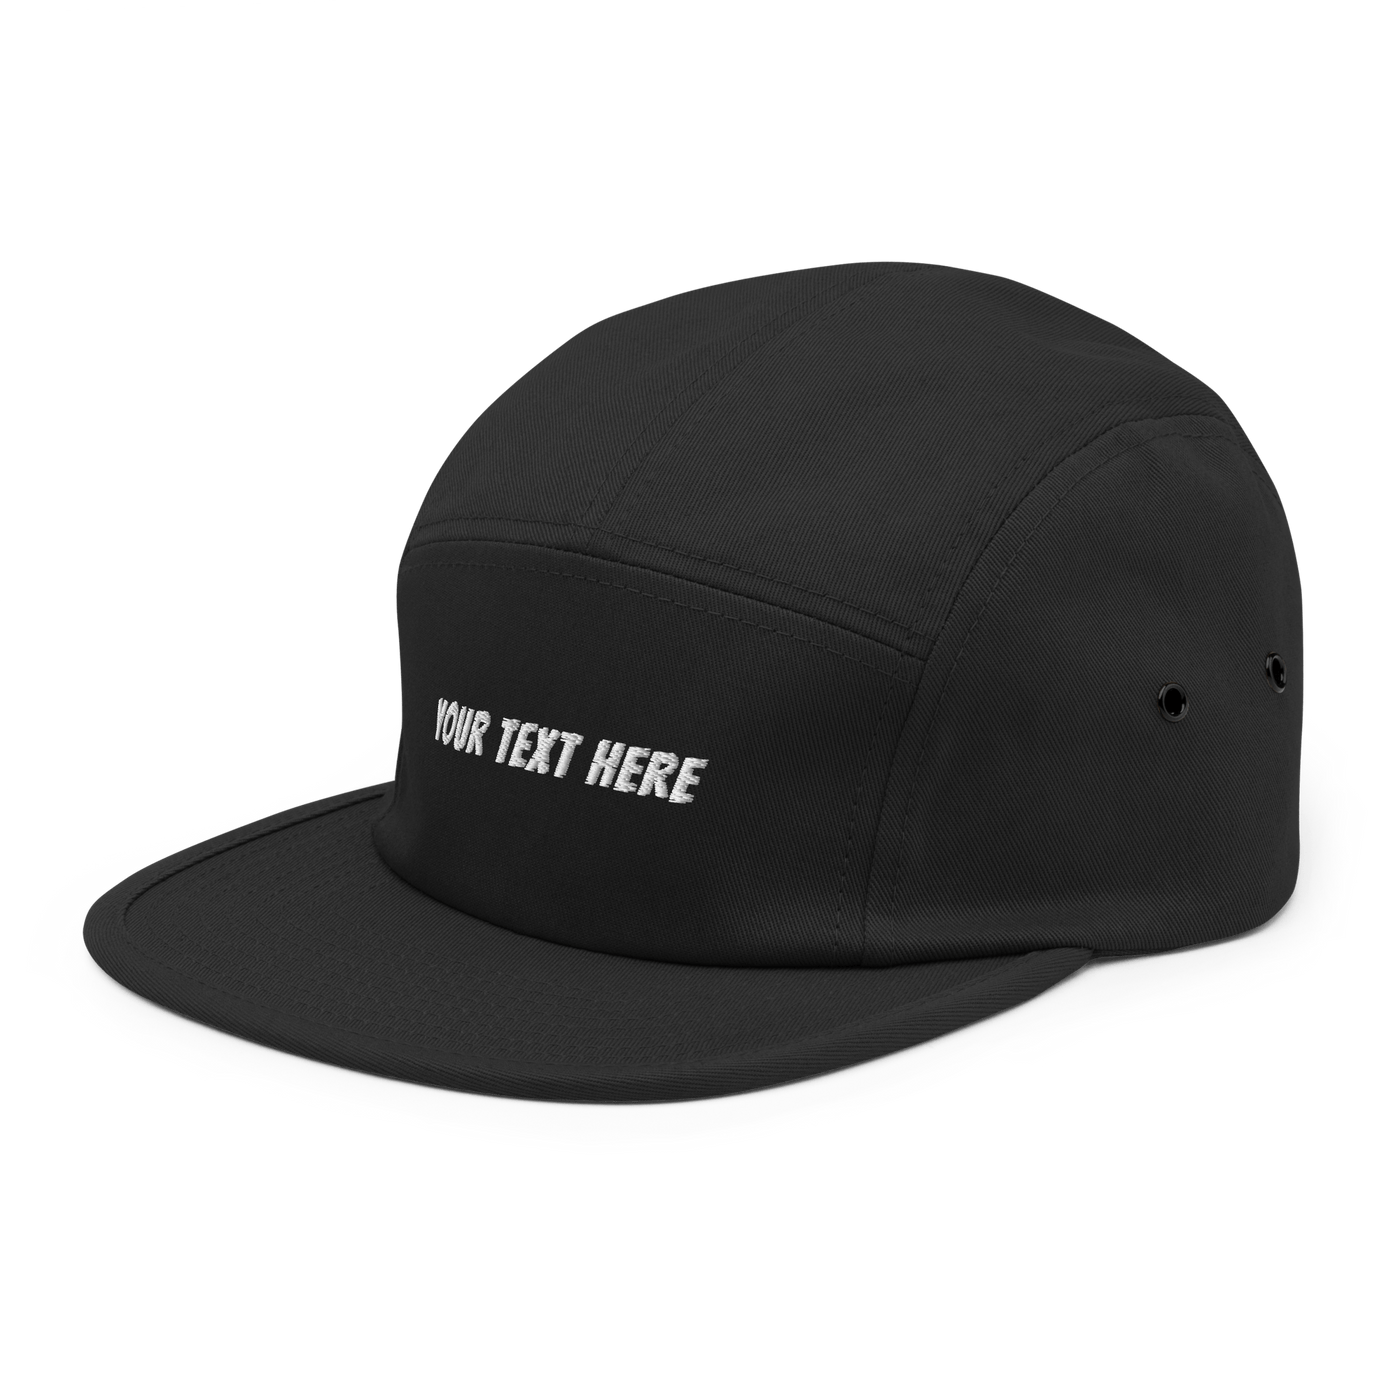 Customize Your Own Five Panel Cap - Black - - Just Another Cap Store